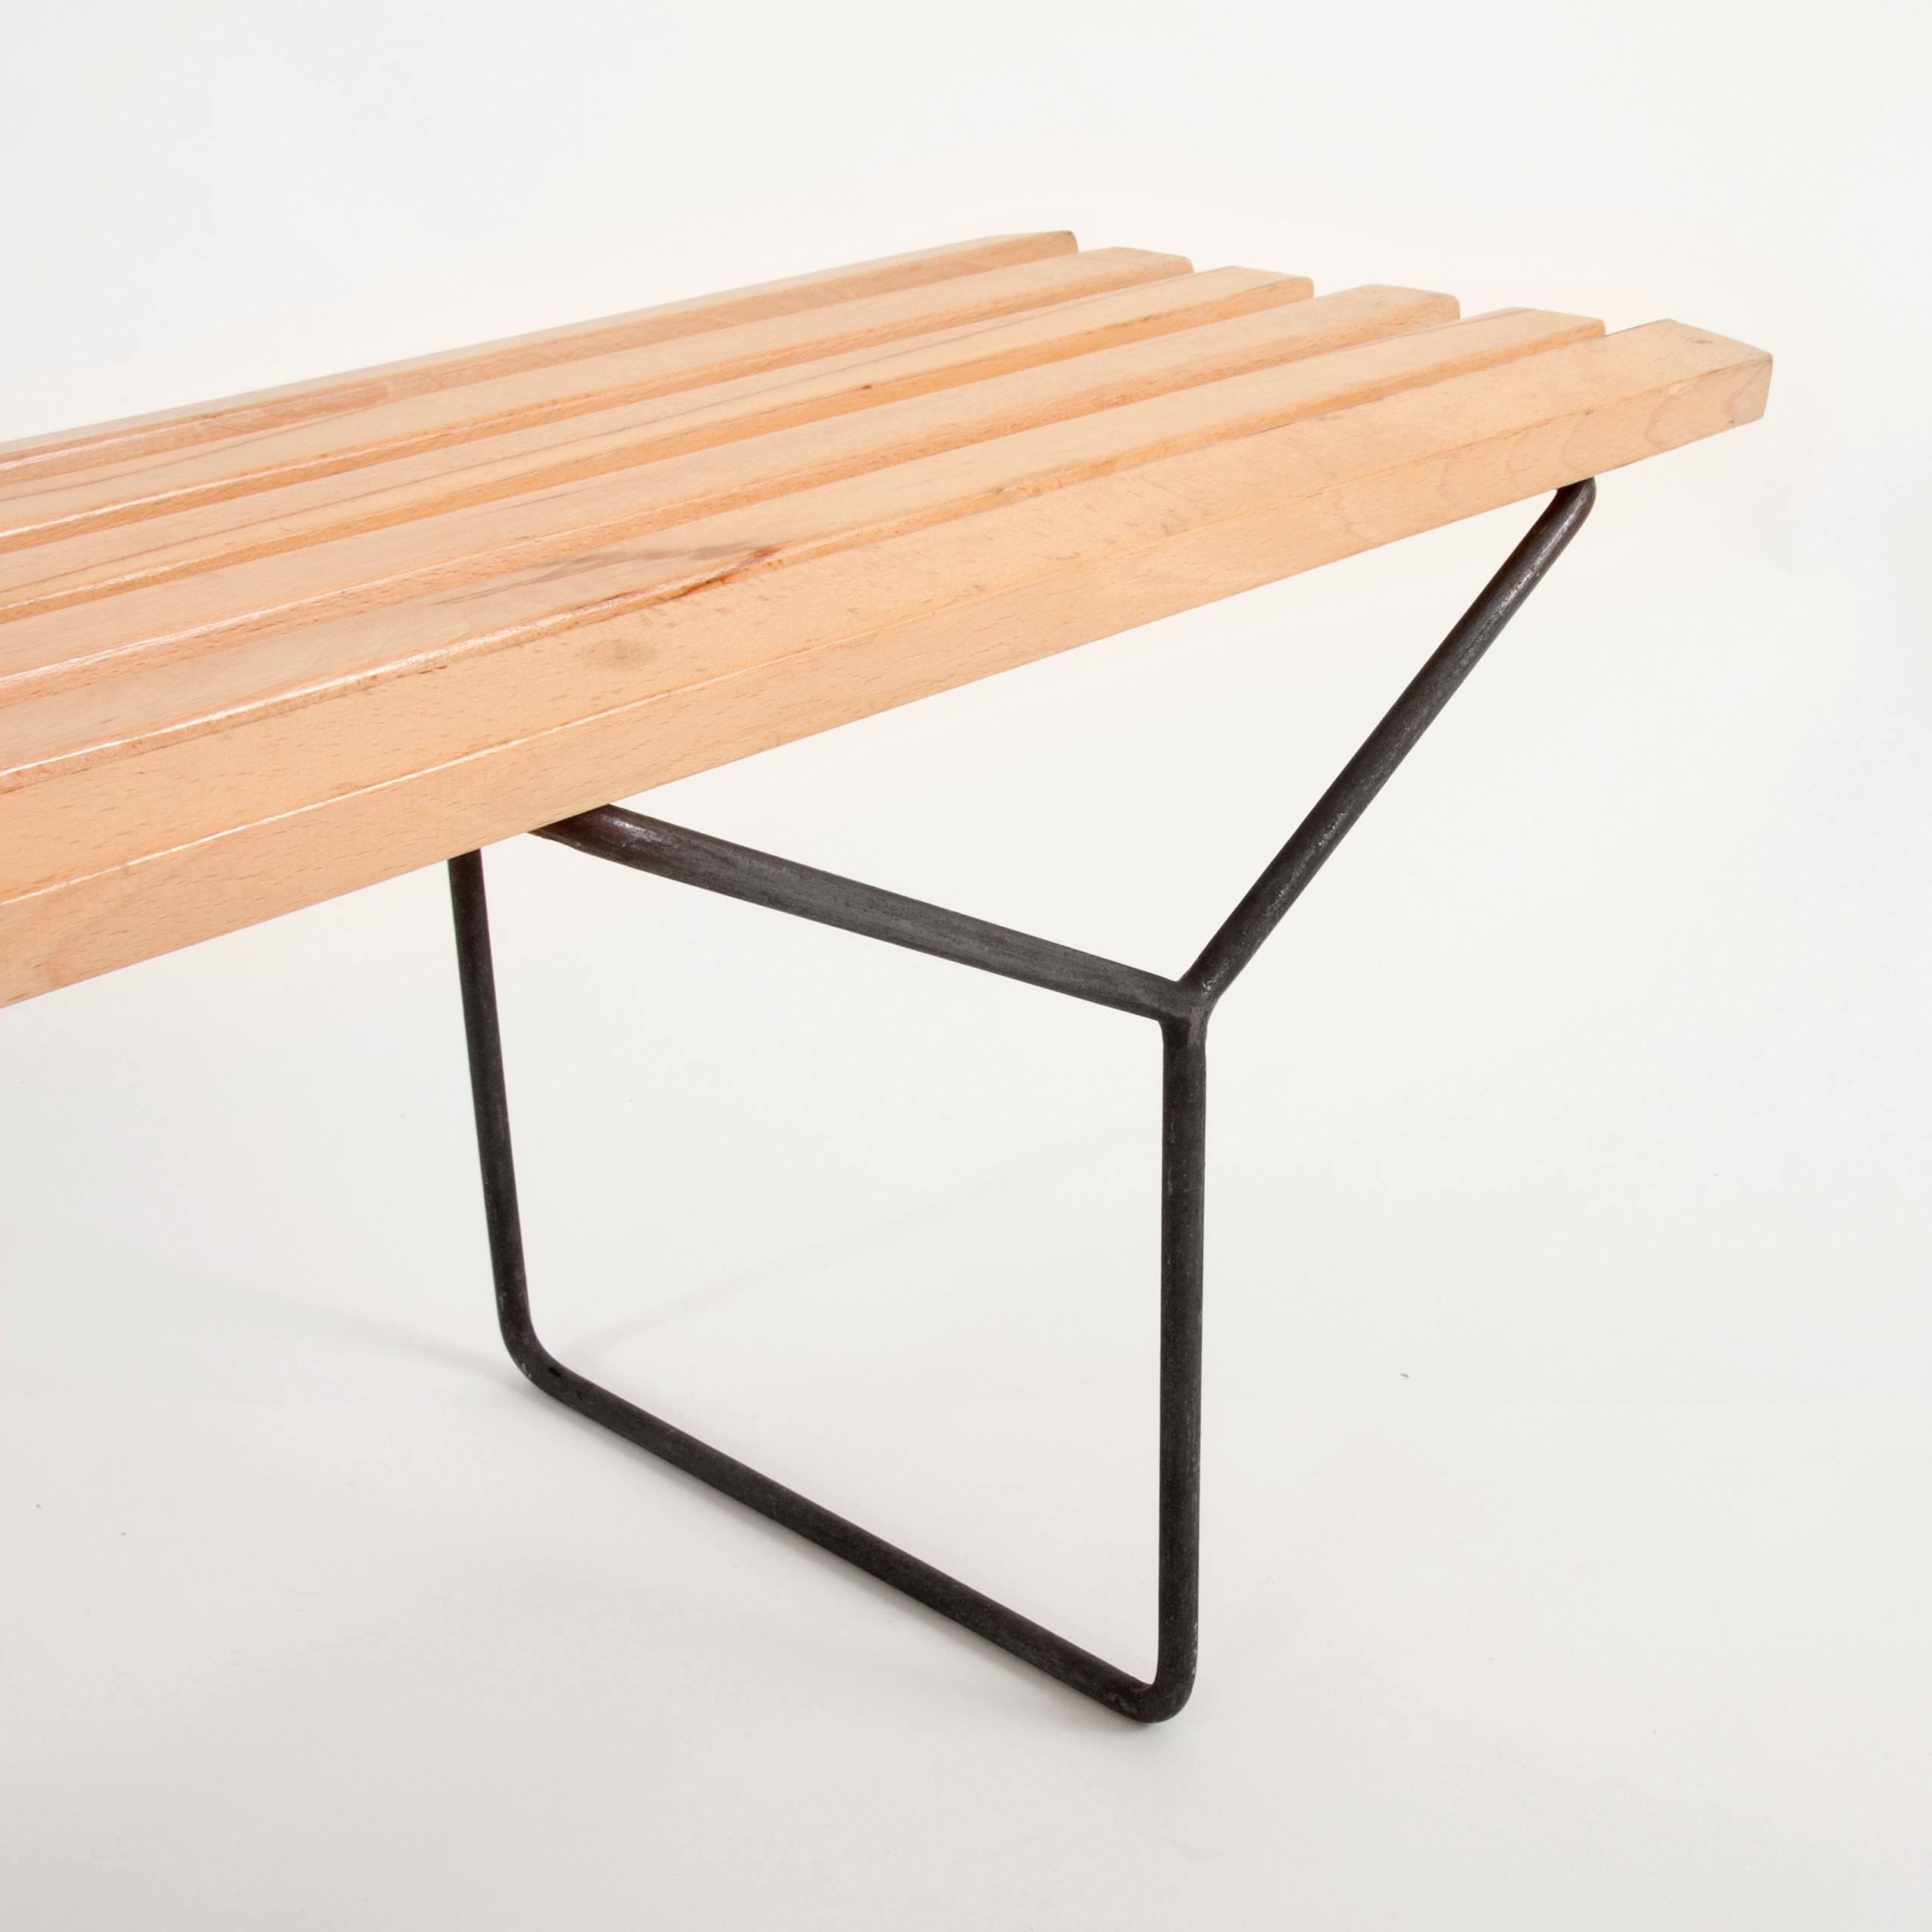 Iron Beautiful Midcentury Slat Bench by Harry Bertoia for Knoll, USA, 1950s For Sale